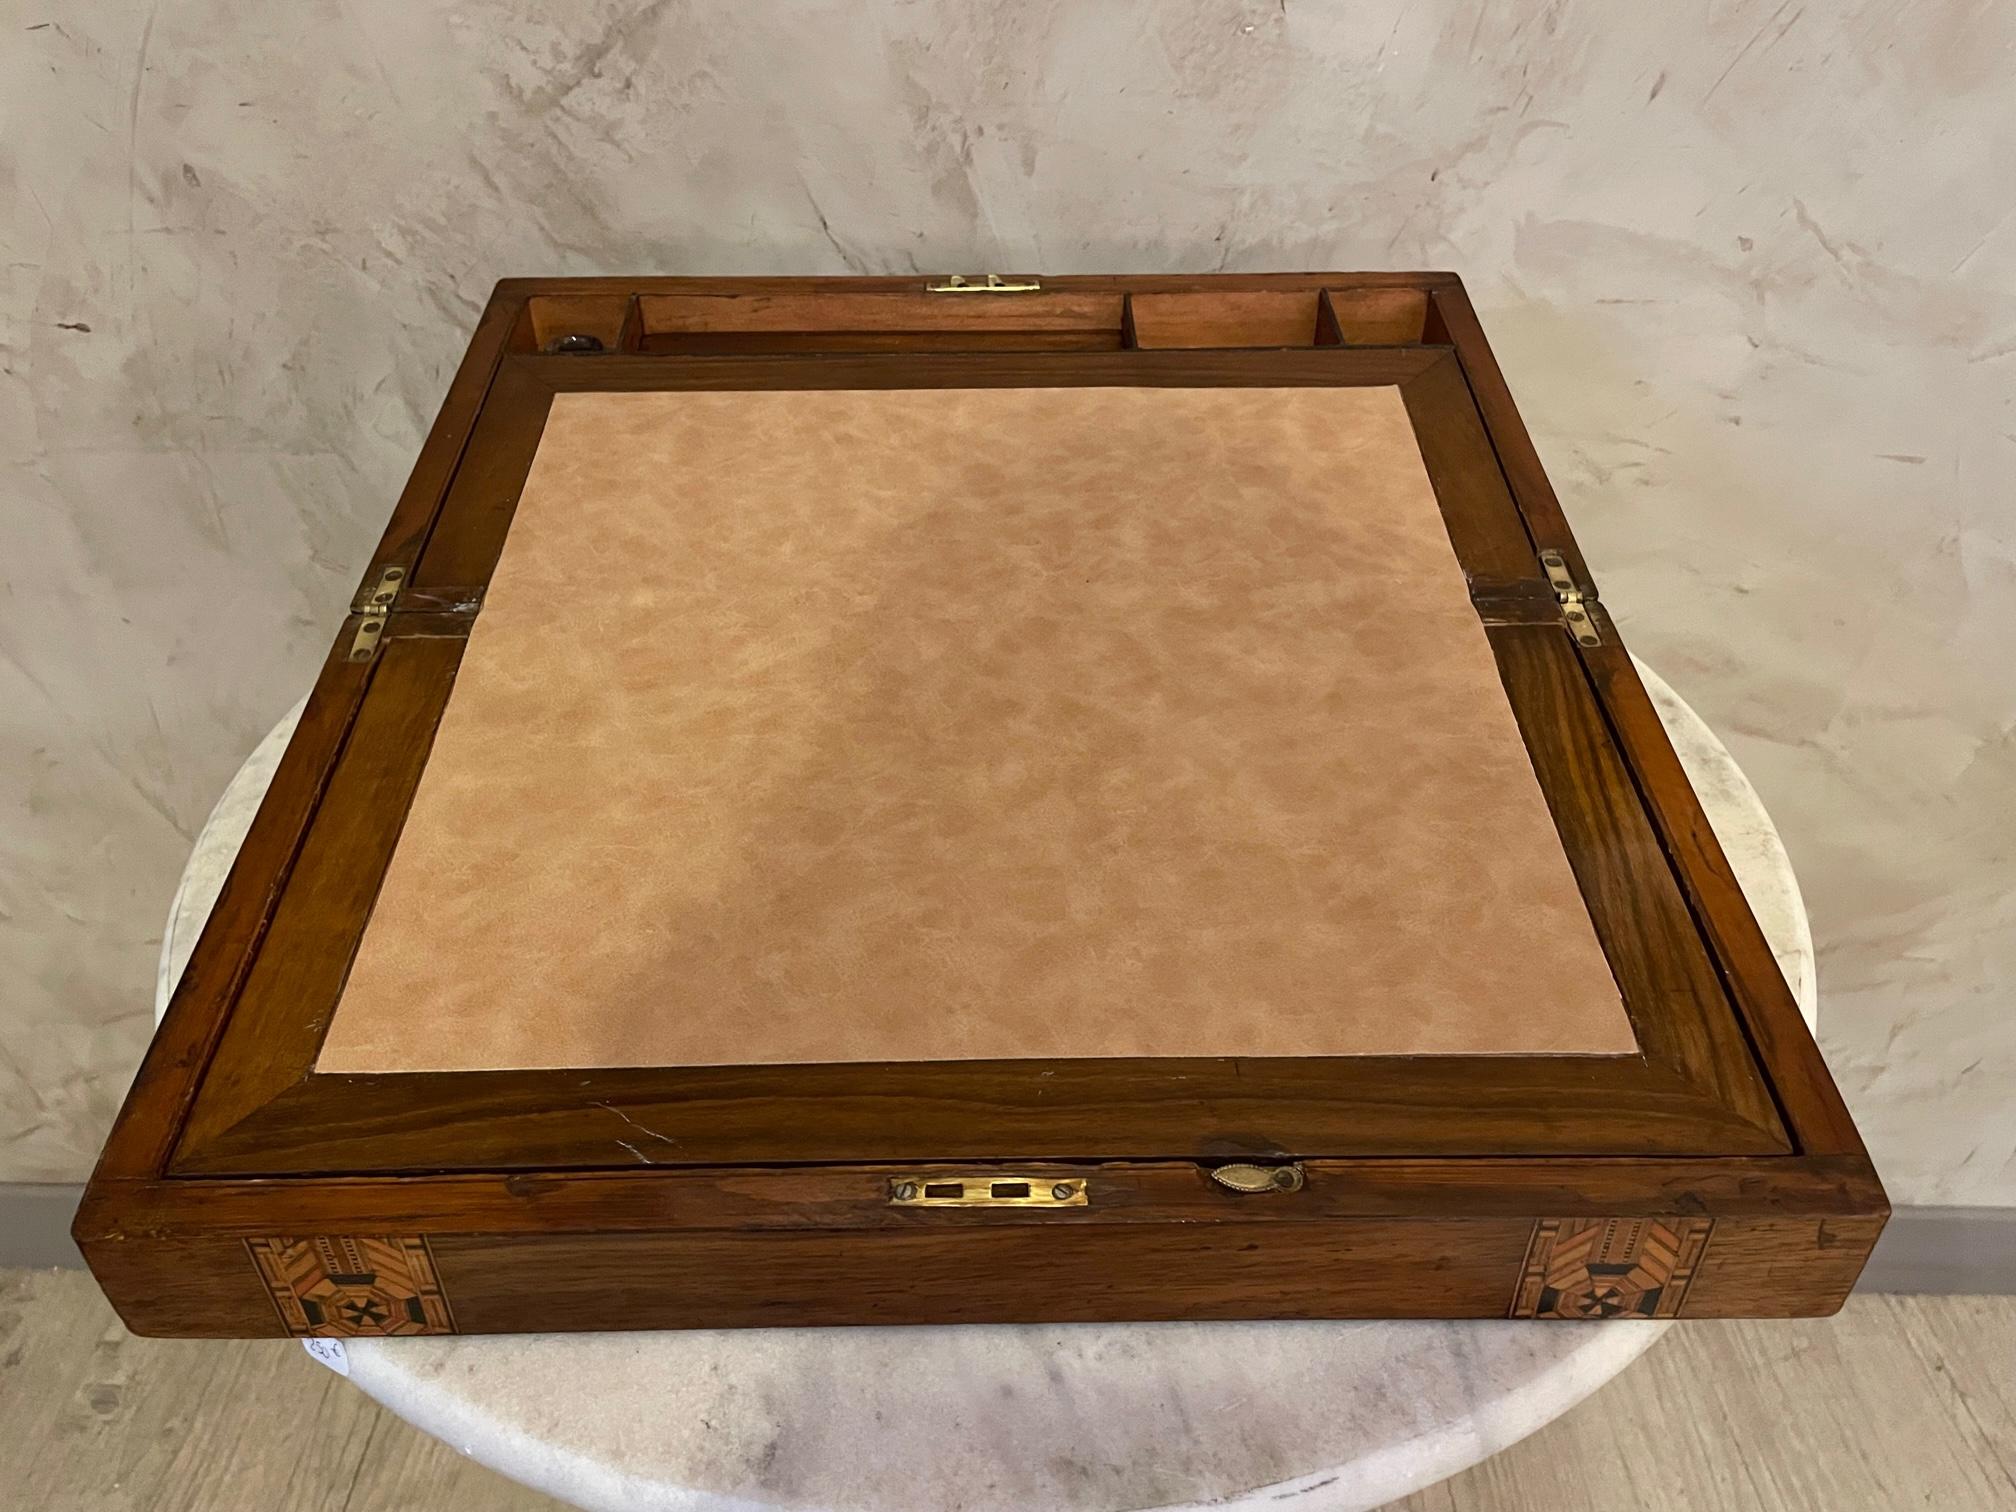 Beautiful walnut desktop box which opens into a writing slope. 
Decorated on the outside with 2 decorative inlaid tunbridge ware bands. 
Box opens out to a beige fabric writing slope which opens both ways to allow access for further storage. No